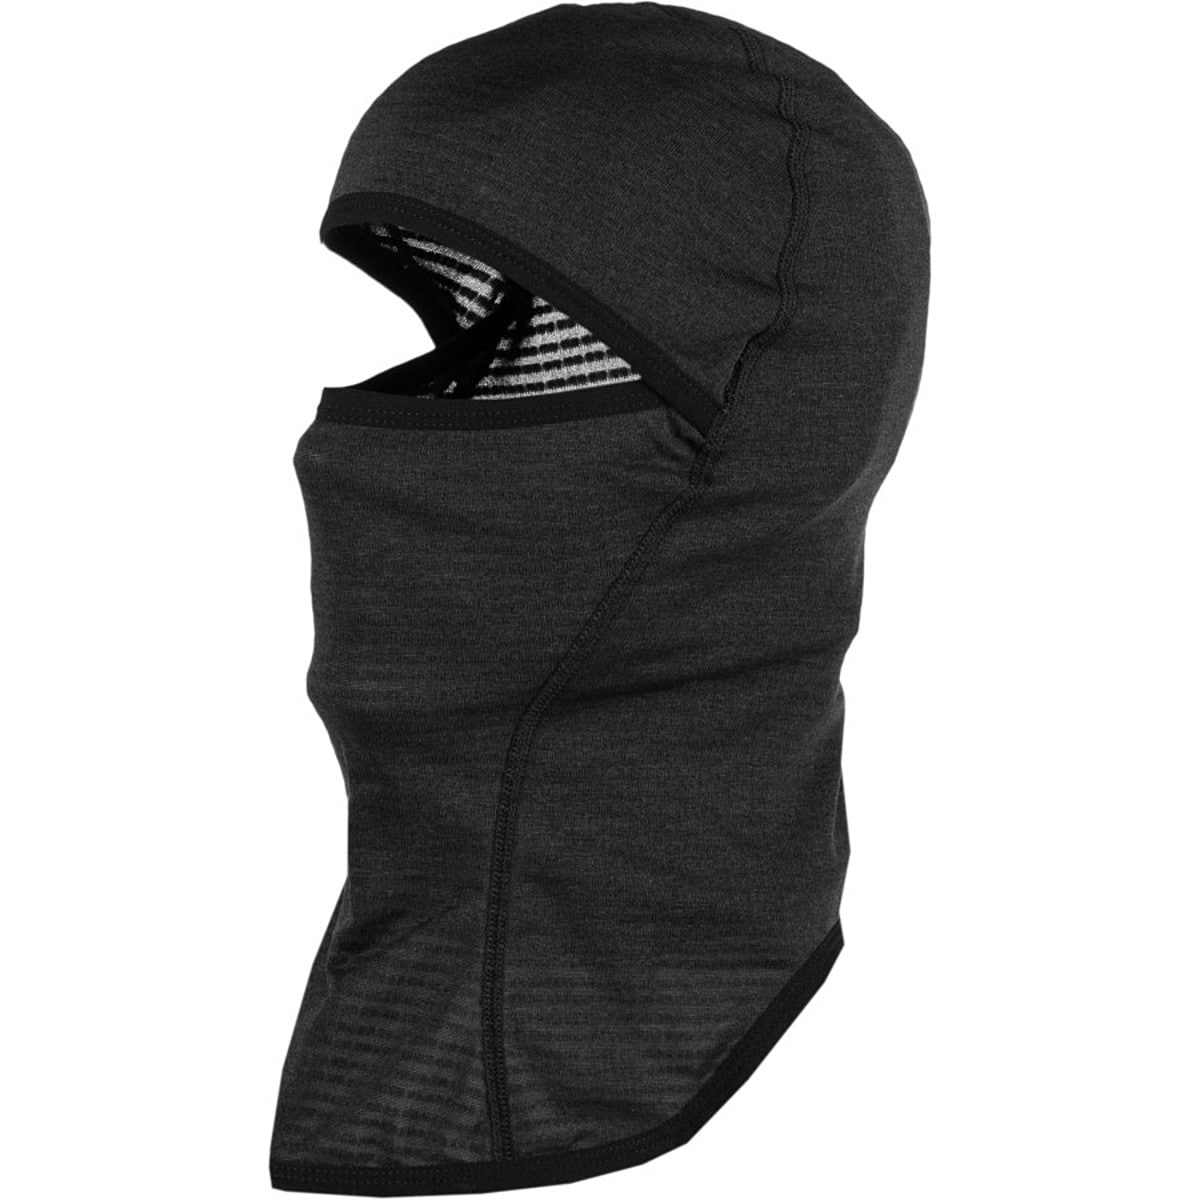 Cap 4 Expedition Weight Balaclava - Accessories